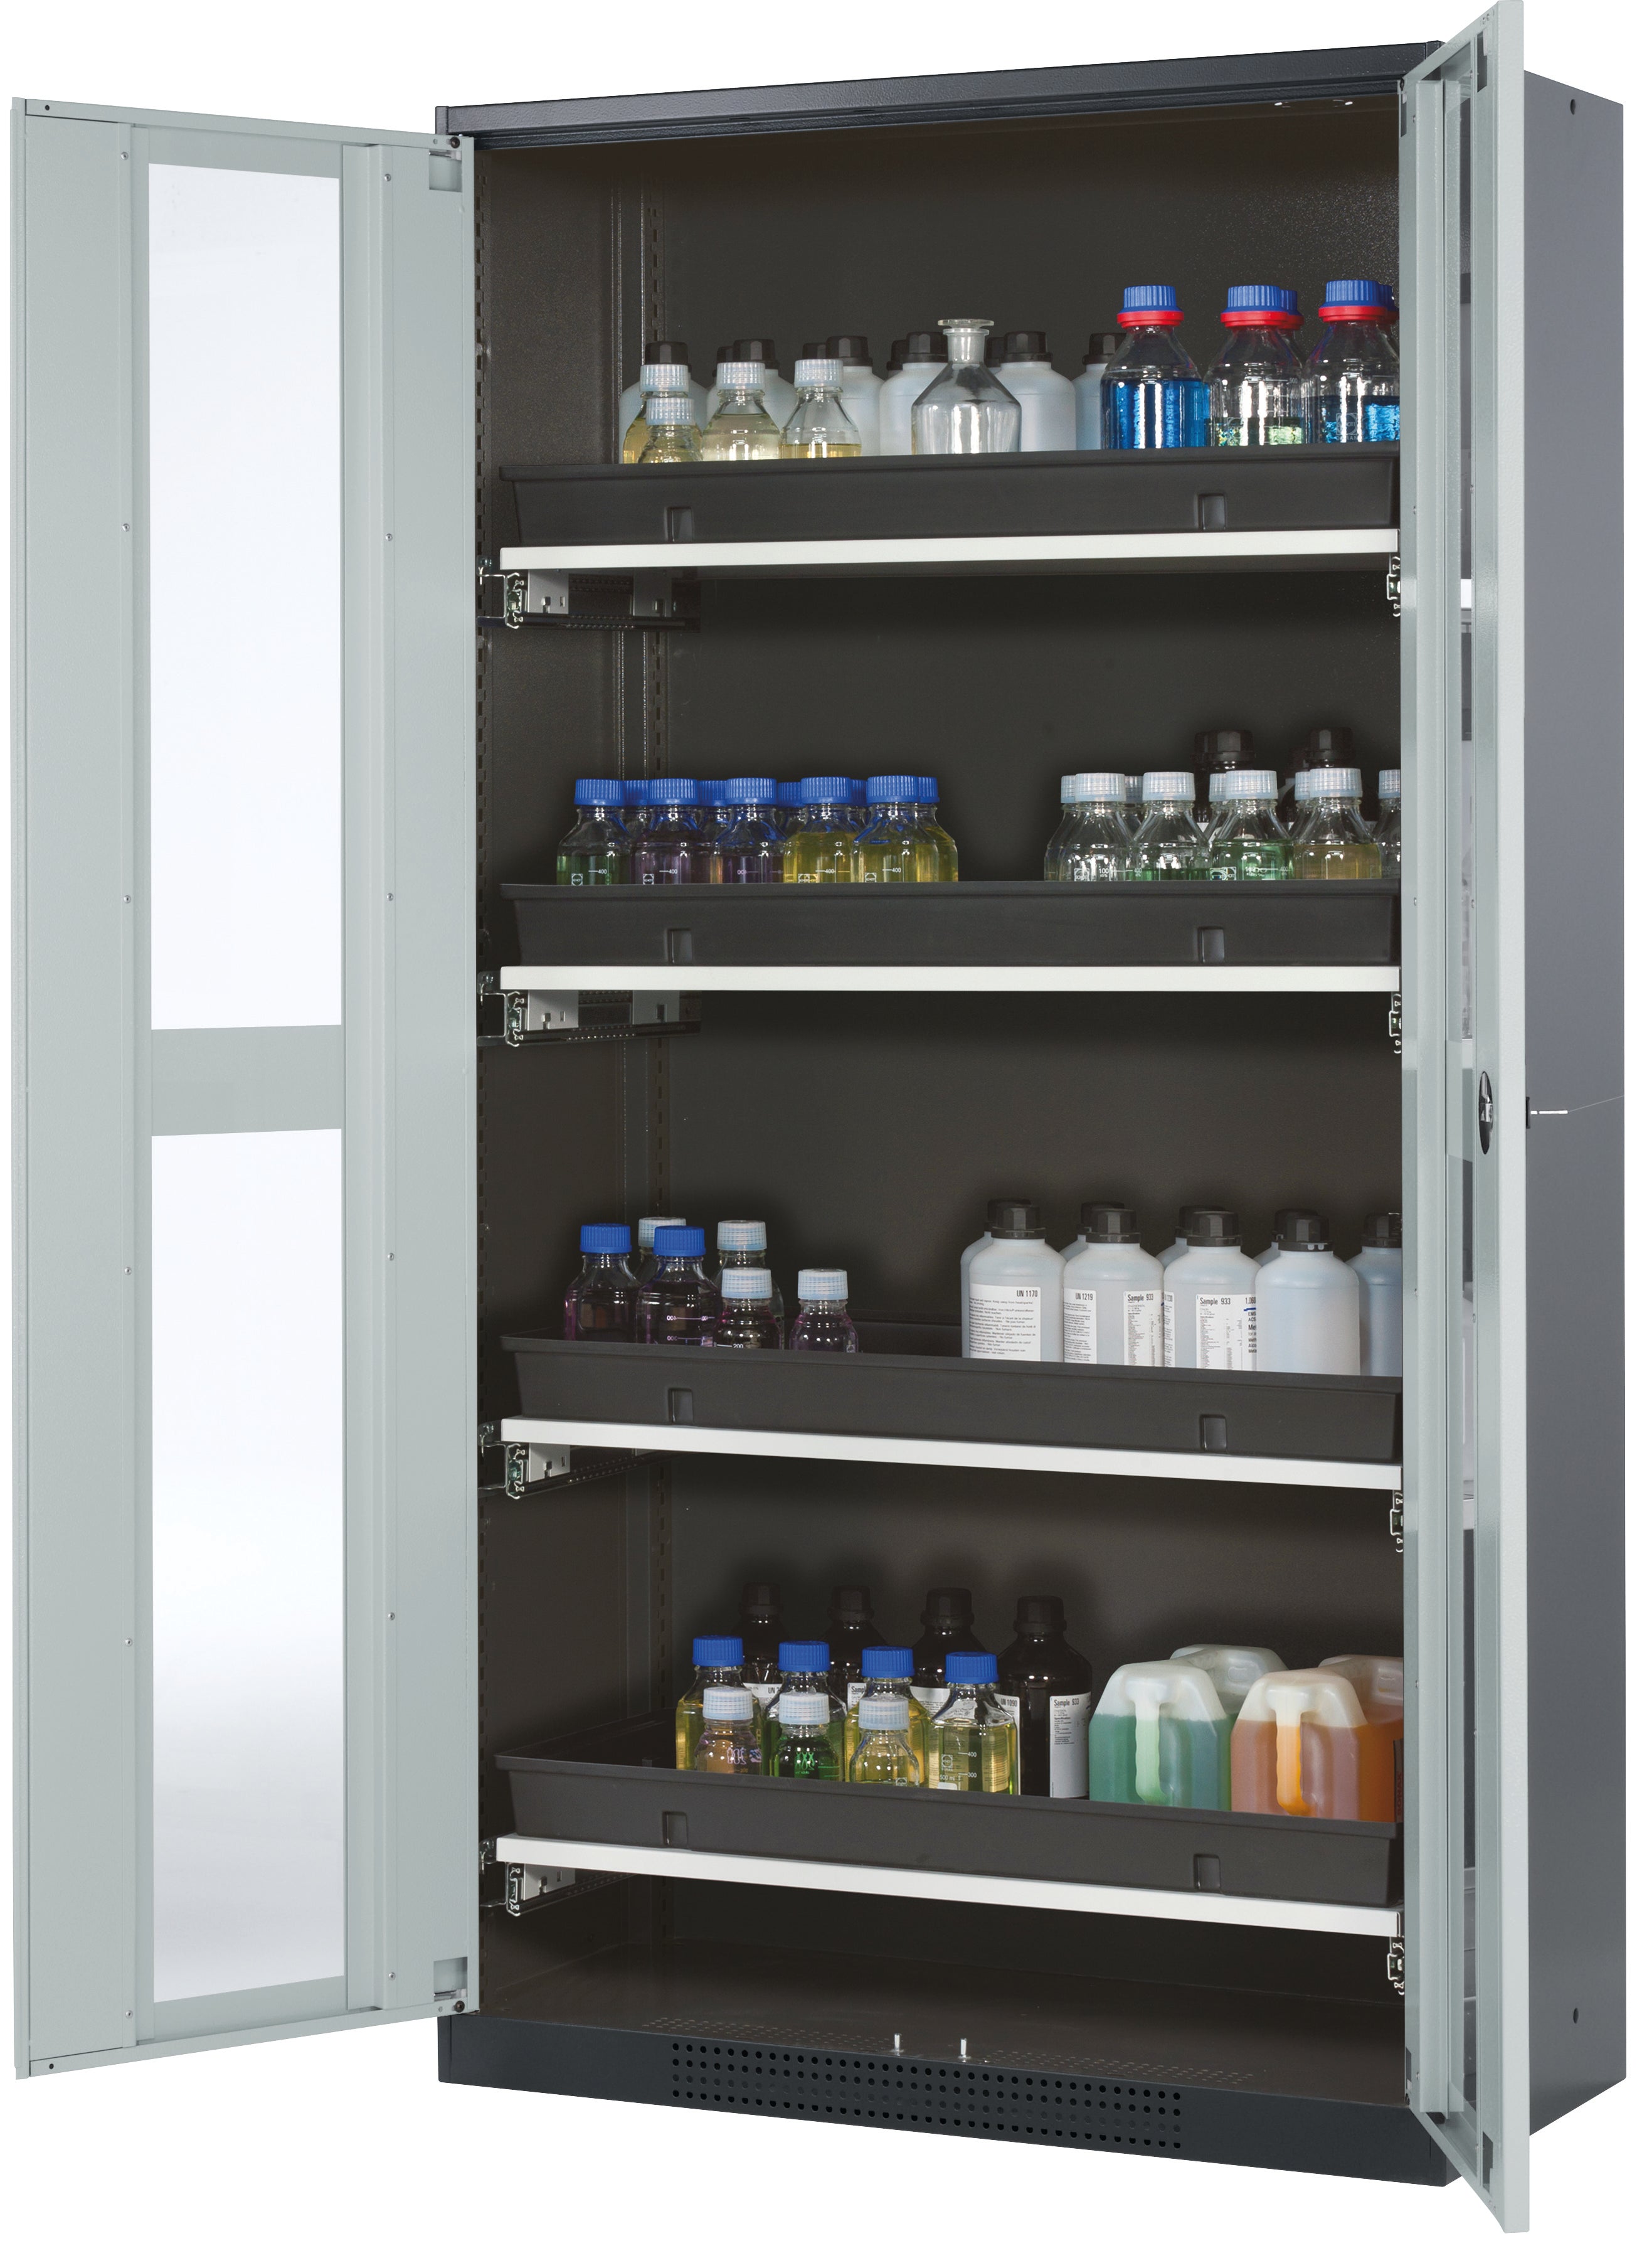 Chemical cabinet CS-CLASSIC-G model CS.195.105.WDFW in light gray RAL 7035 with 4x AbZ pull-out shelves (sheet steel/polypropylene)